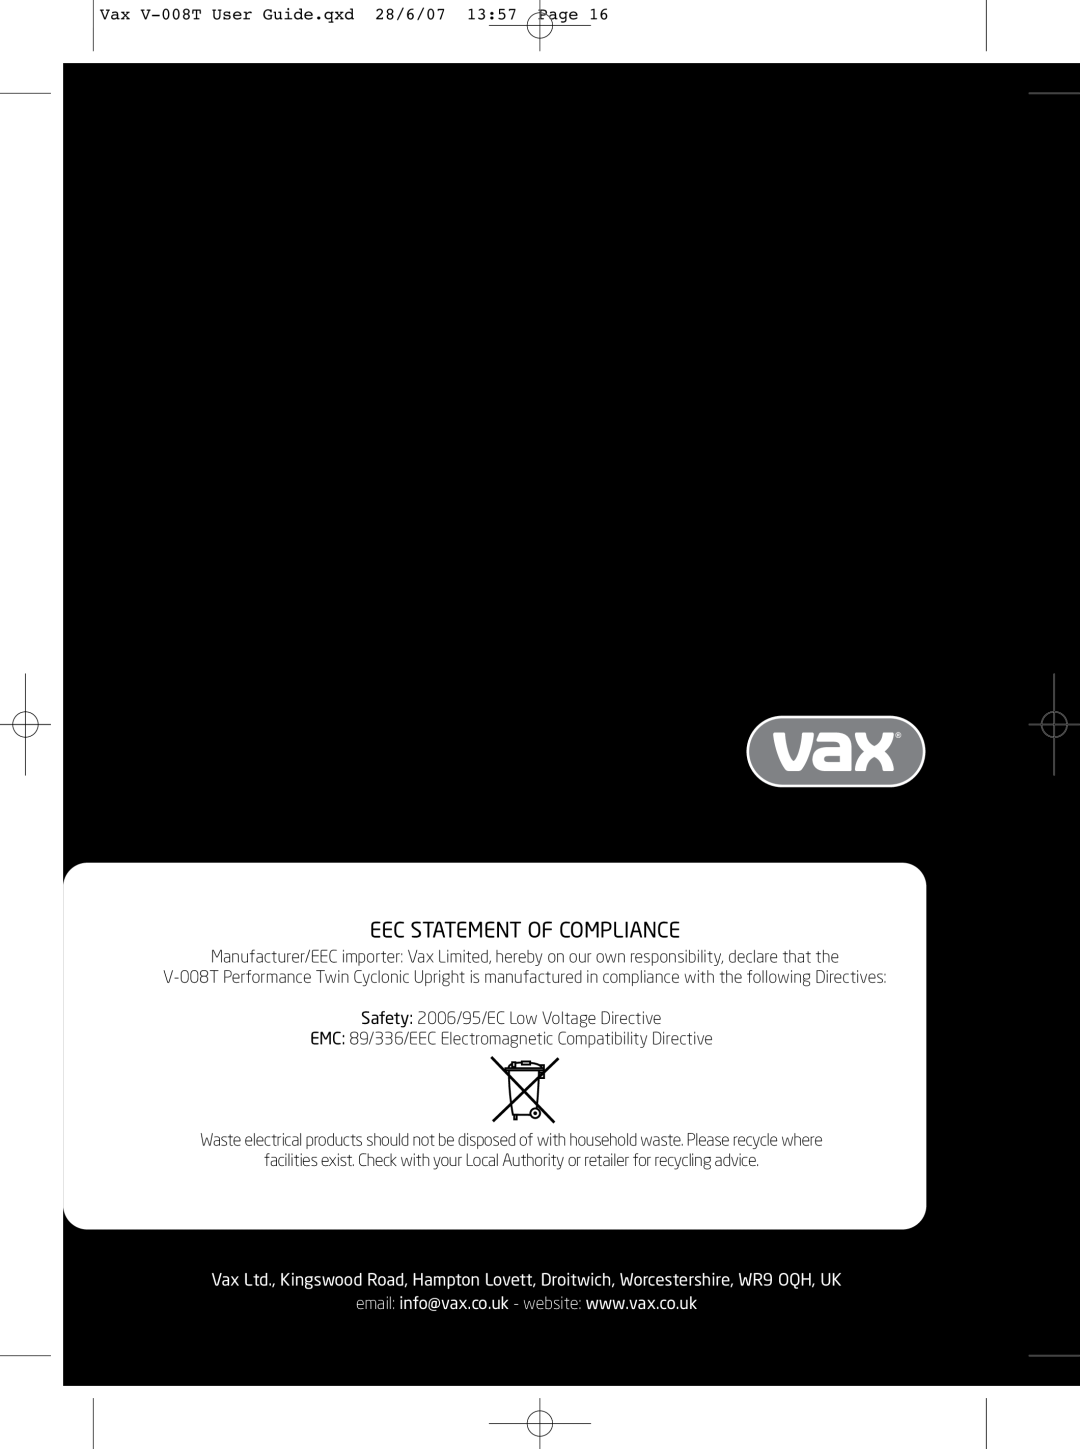 Vax V-008T instruction manual Eec Statement Of Compliance 